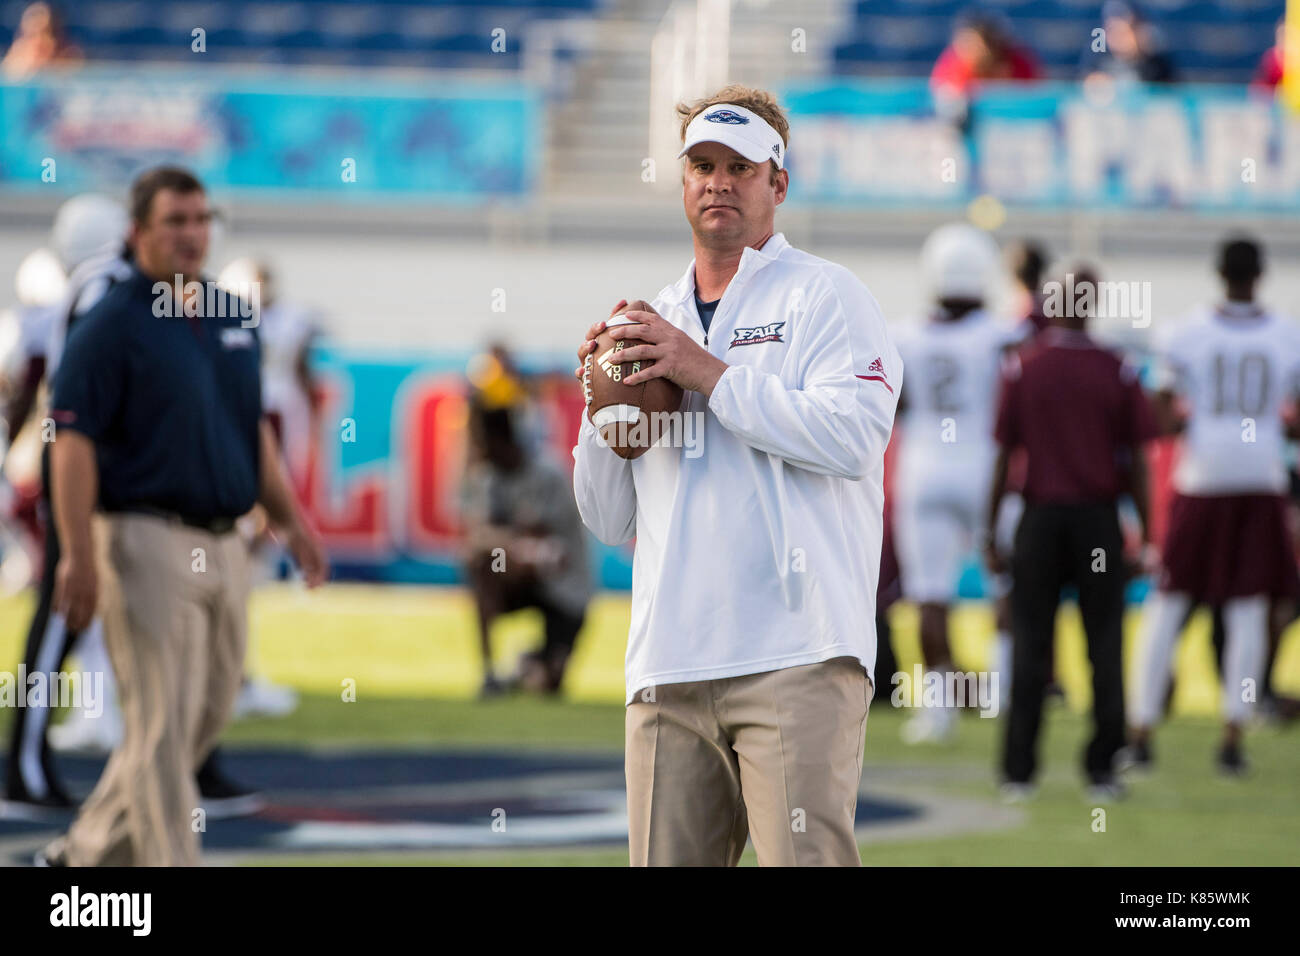 Boca Raton, Florida, USA. 16th Sep, 2017. Head coach Lane Kiffin of Florida Atlantic in action during the NCAA football game between the Florida Atlantic Owls and the Bethune Cookman Wildcats in Boca Raton, Florida. The Owls defeated the Wildcats 45-0. Credit: csm/Alamy Live News Stock Photo